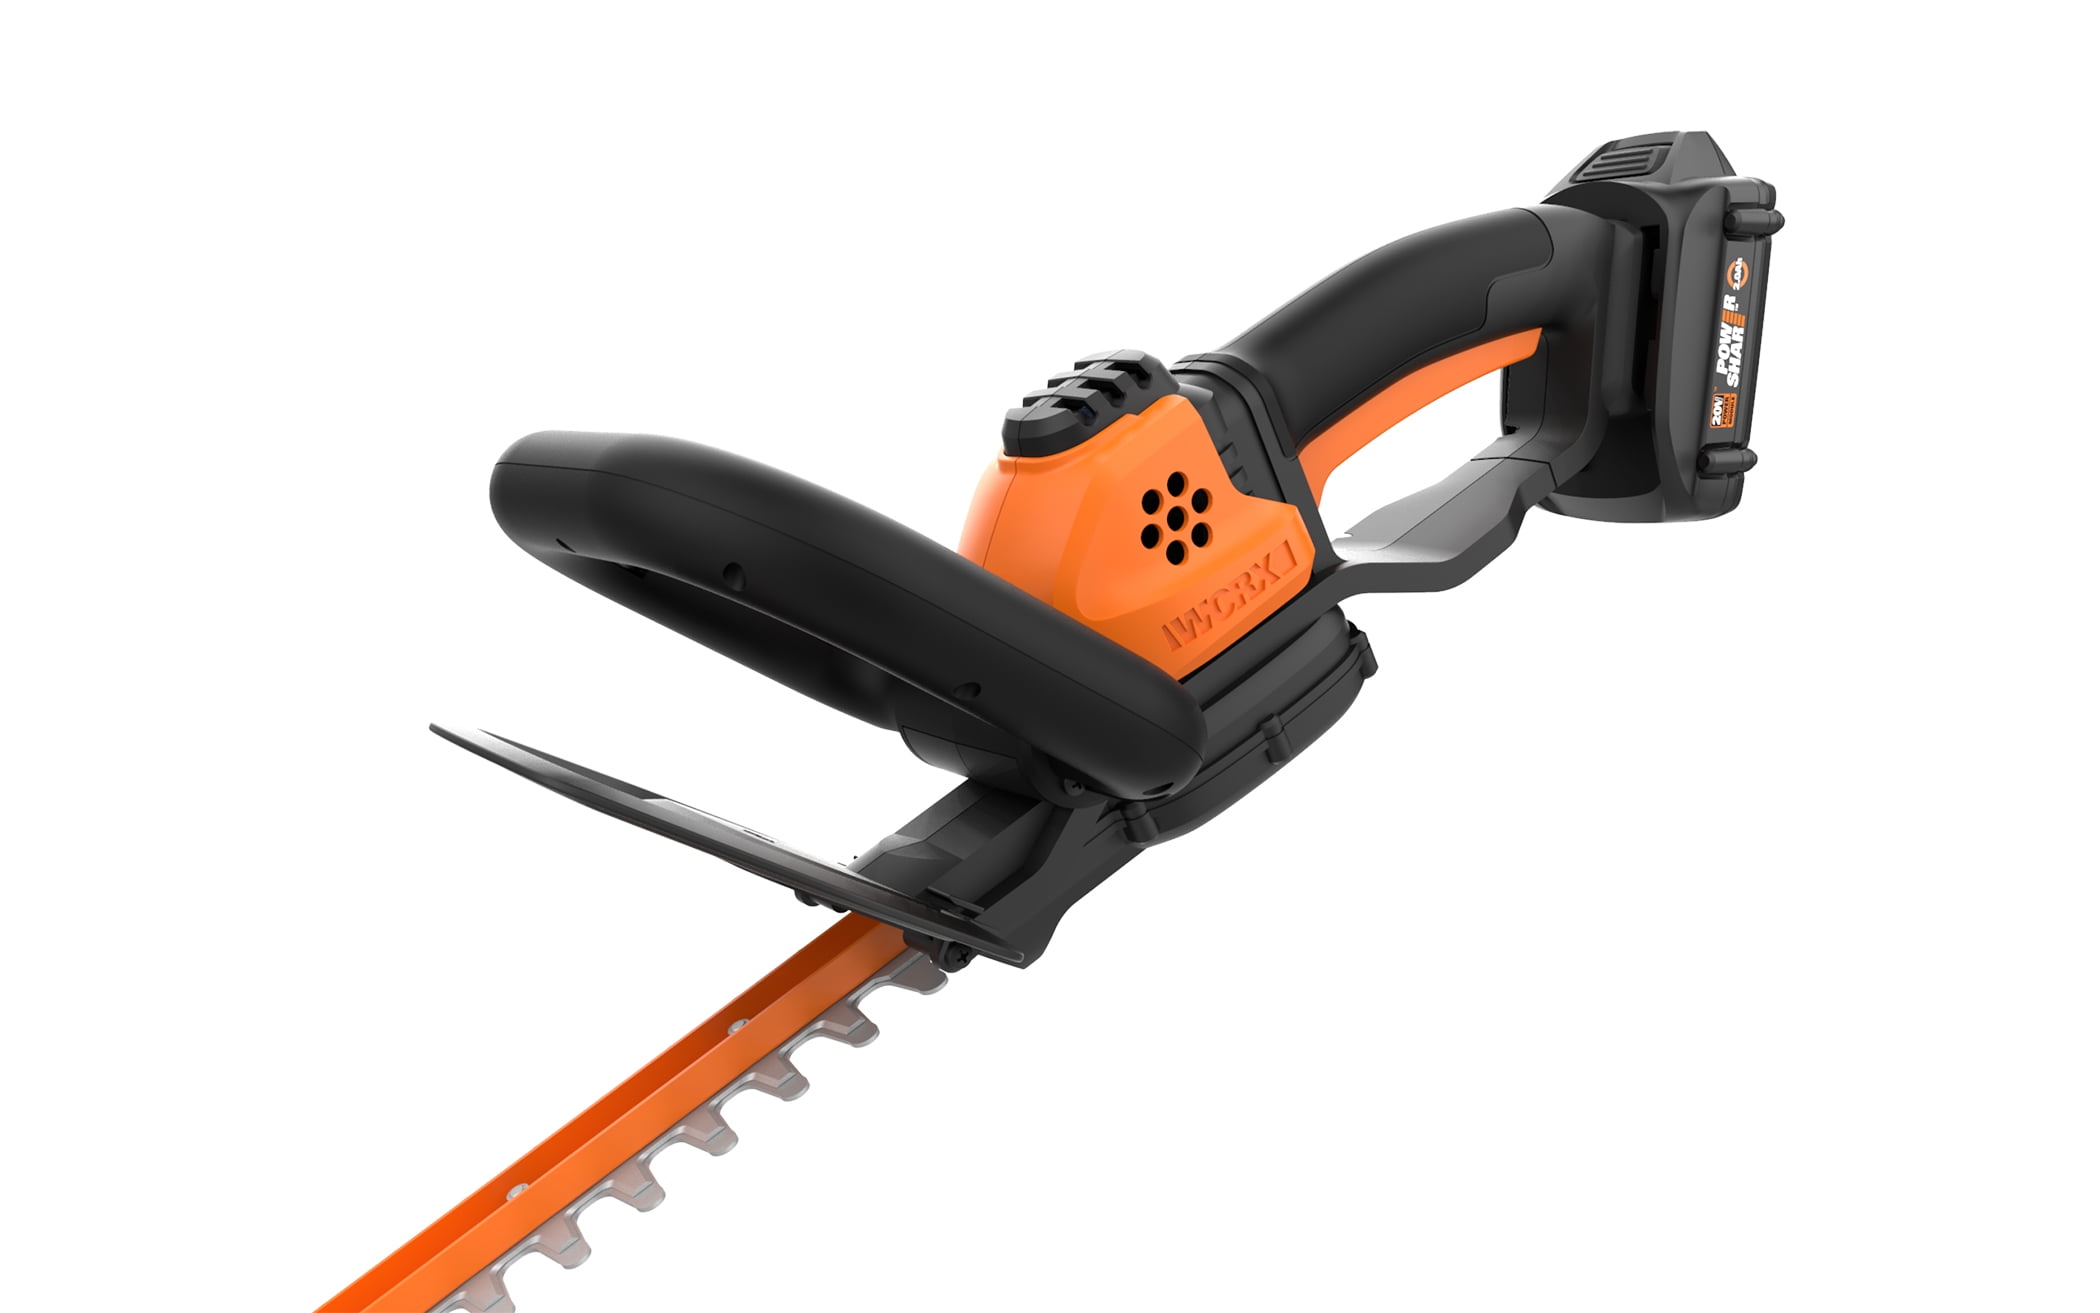 the worx hedge trimmer